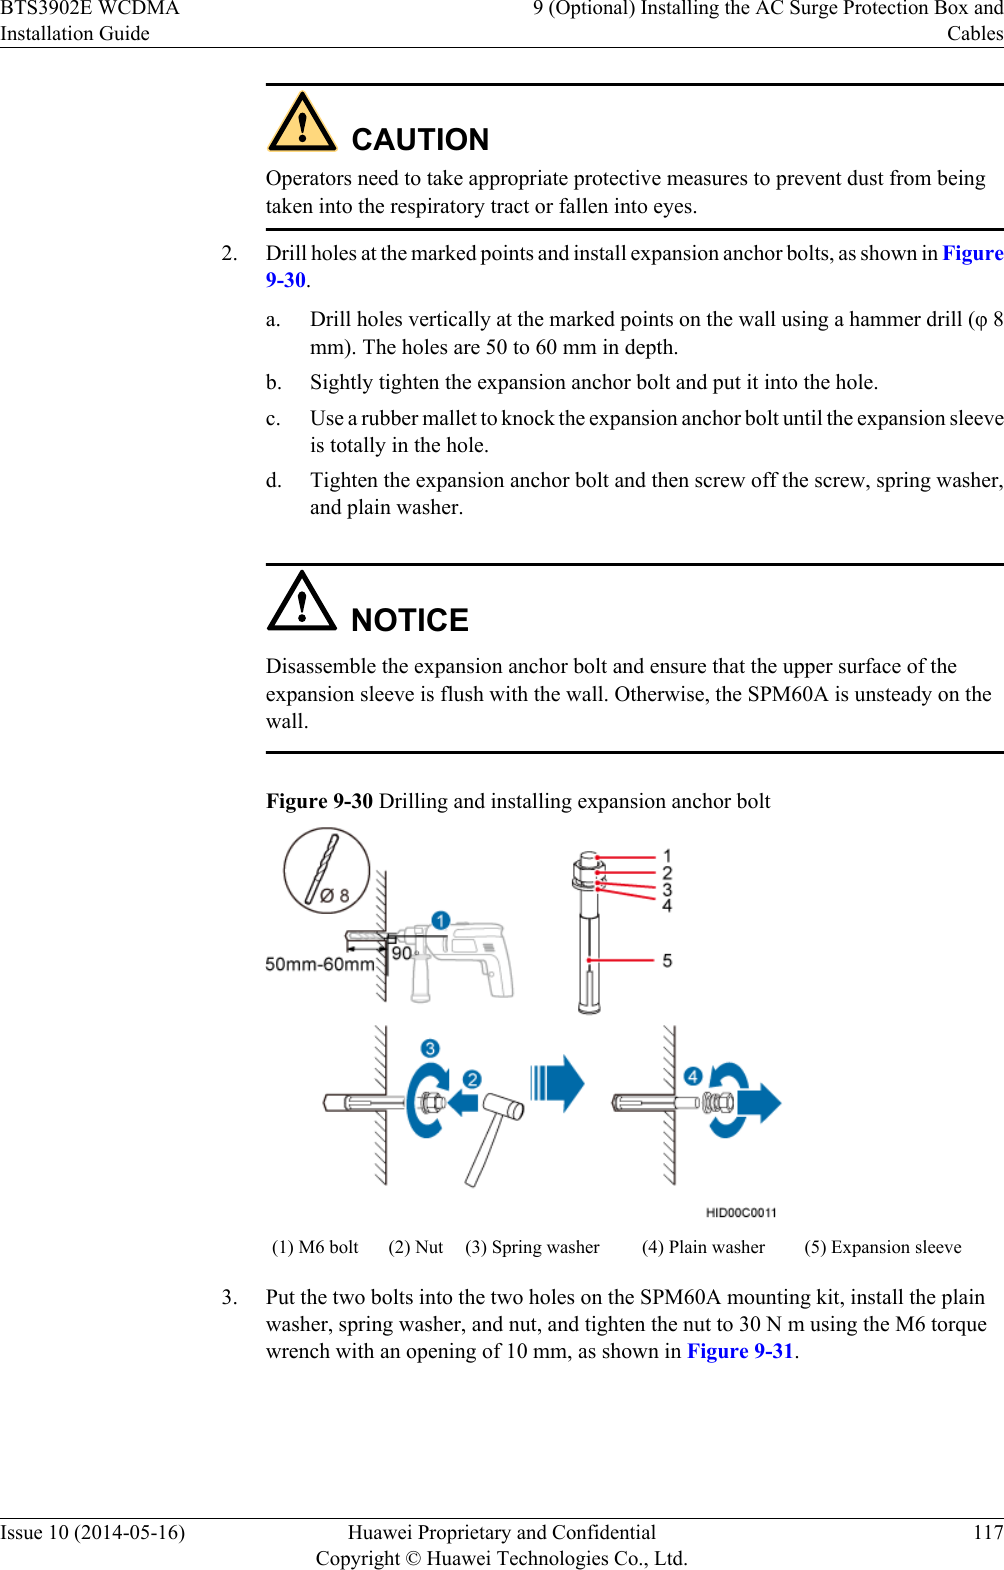 CAUTIONOperators need to take appropriate protective measures to prevent dust from beingtaken into the respiratory tract or fallen into eyes.2. Drill holes at the marked points and install expansion anchor bolts, as shown in Figure9-30.a. Drill holes vertically at the marked points on the wall using a hammer drill (φ 8mm). The holes are 50 to 60 mm in depth.b. Sightly tighten the expansion anchor bolt and put it into the hole.c. Use a rubber mallet to knock the expansion anchor bolt until the expansion sleeveis totally in the hole.d. Tighten the expansion anchor bolt and then screw off the screw, spring washer,and plain washer.NOTICEDisassemble the expansion anchor bolt and ensure that the upper surface of theexpansion sleeve is flush with the wall. Otherwise, the SPM60A is unsteady on thewall.Figure 9-30 Drilling and installing expansion anchor bolt(1) M6 bolt (2) Nut (3) Spring washer (4) Plain washer (5) Expansion sleeve3. Put the two bolts into the two holes on the SPM60A mounting kit, install the plainwasher, spring washer, and nut, and tighten the nut to 30 N m using the M6 torquewrench with an opening of 10 mm, as shown in Figure 9-31.BTS3902E WCDMAInstallation Guide9 (Optional) Installing the AC Surge Protection Box andCablesIssue 10 (2014-05-16) Huawei Proprietary and ConfidentialCopyright © Huawei Technologies Co., Ltd.117